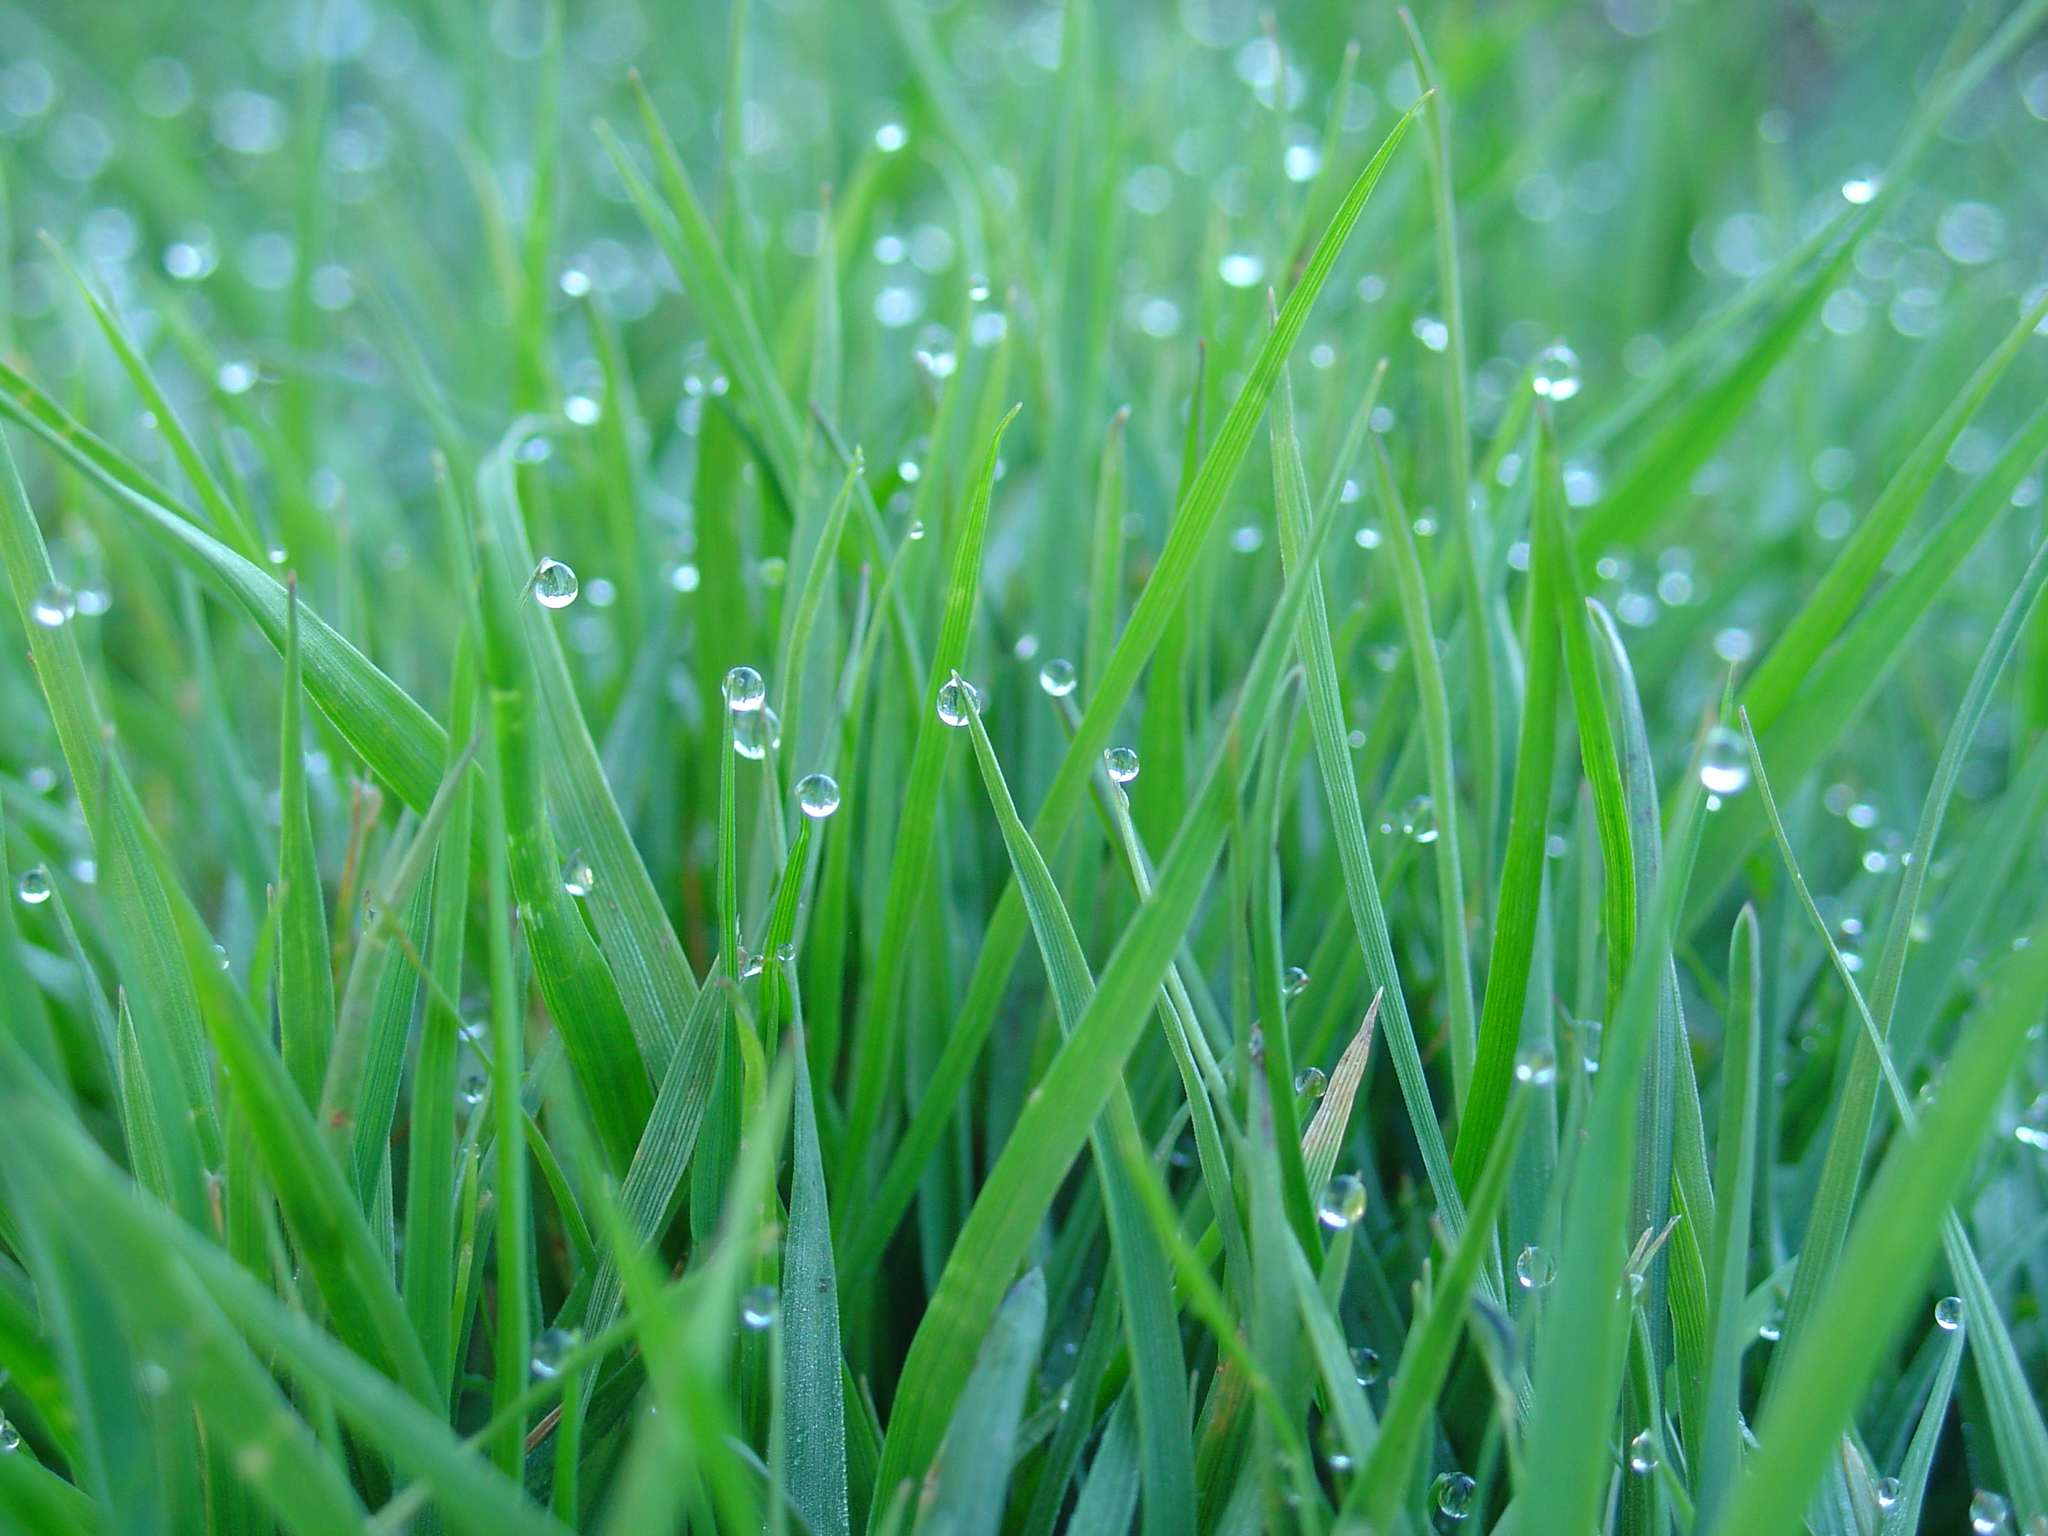 Morning Dew by JMarie-Photography on DeviantArt